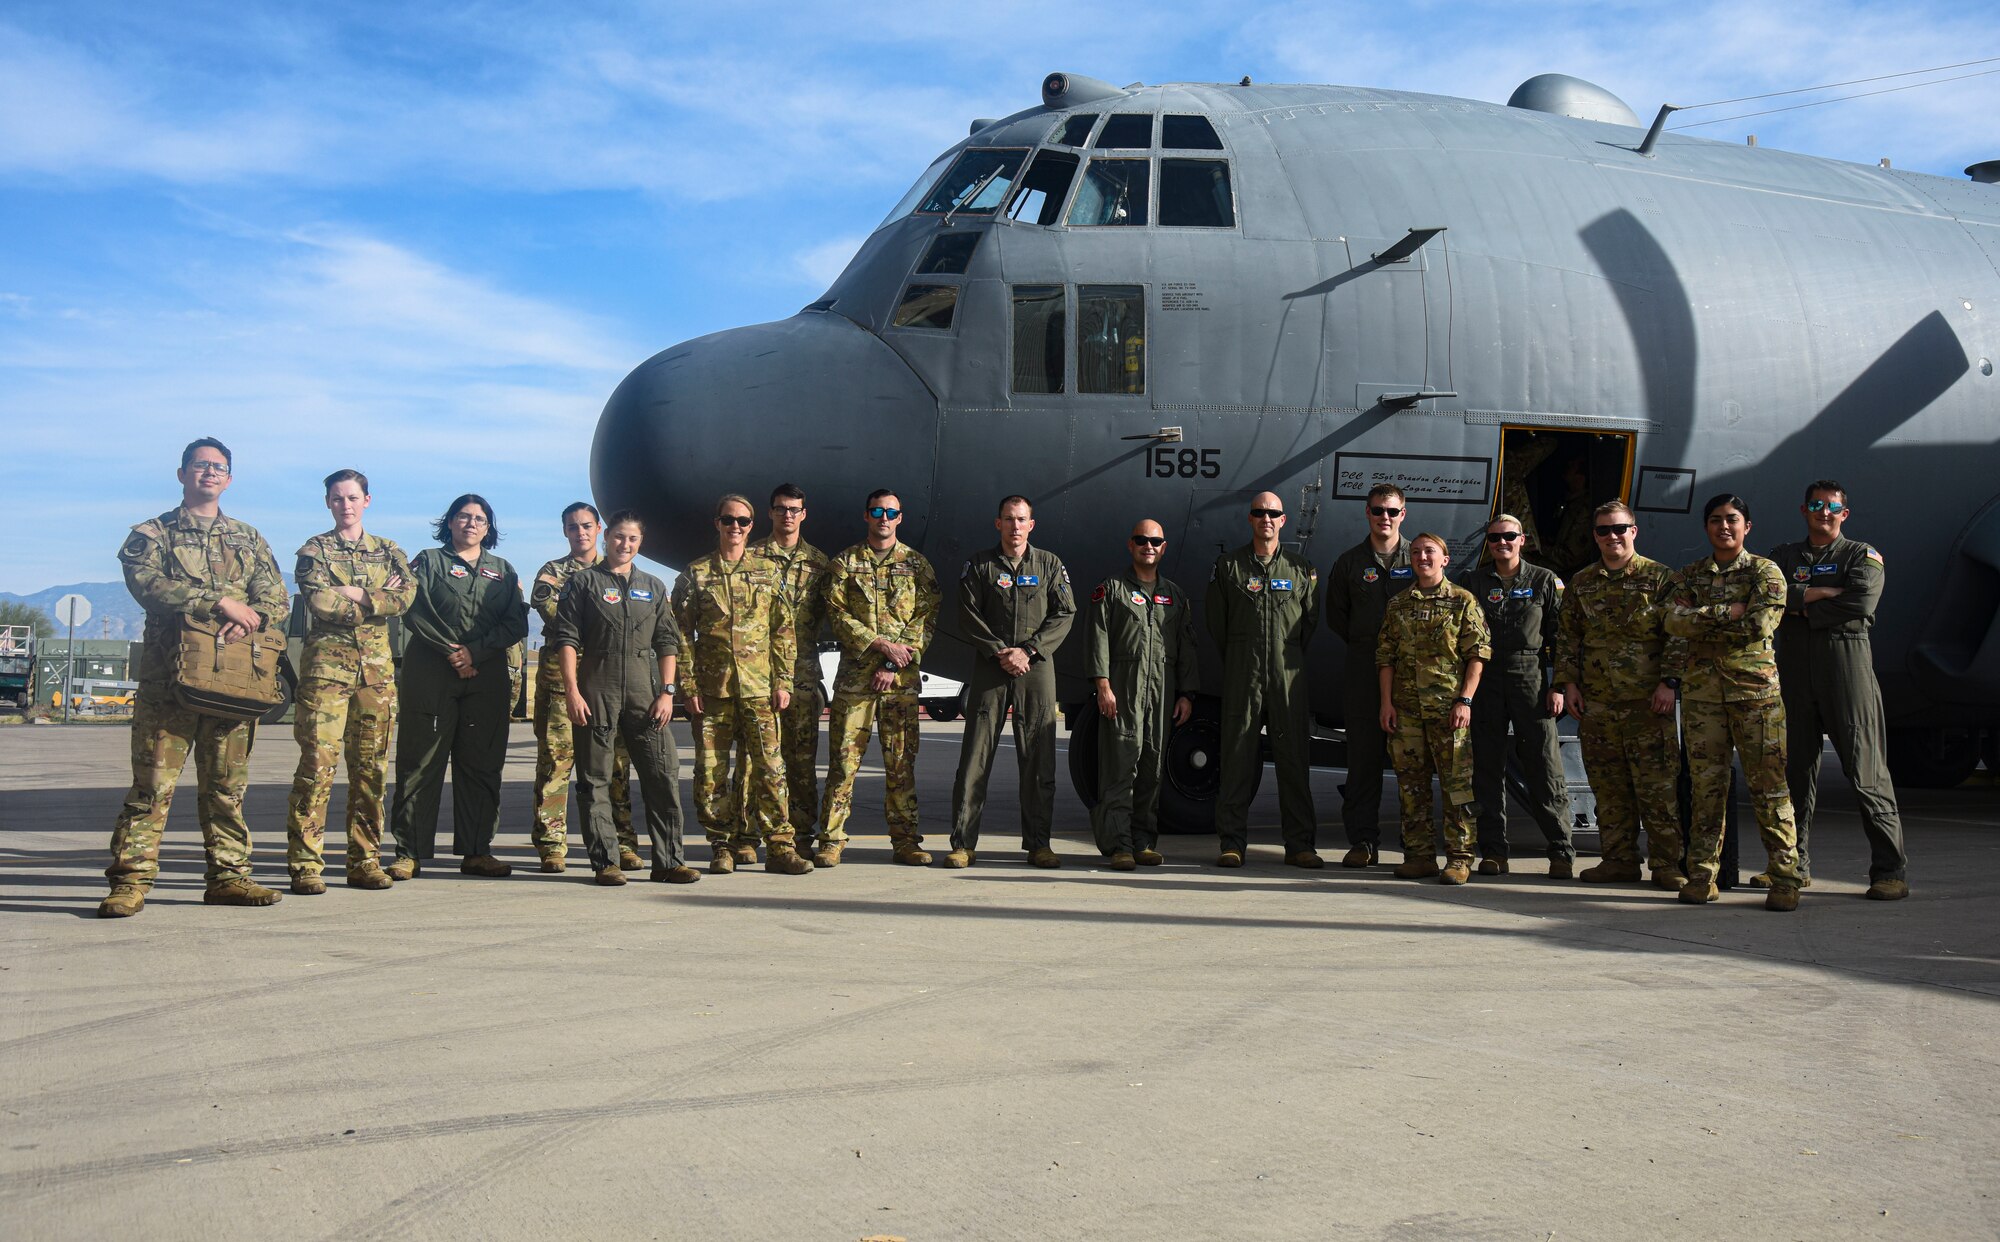 Pictured above is a group of people posing in front of an aircraft.